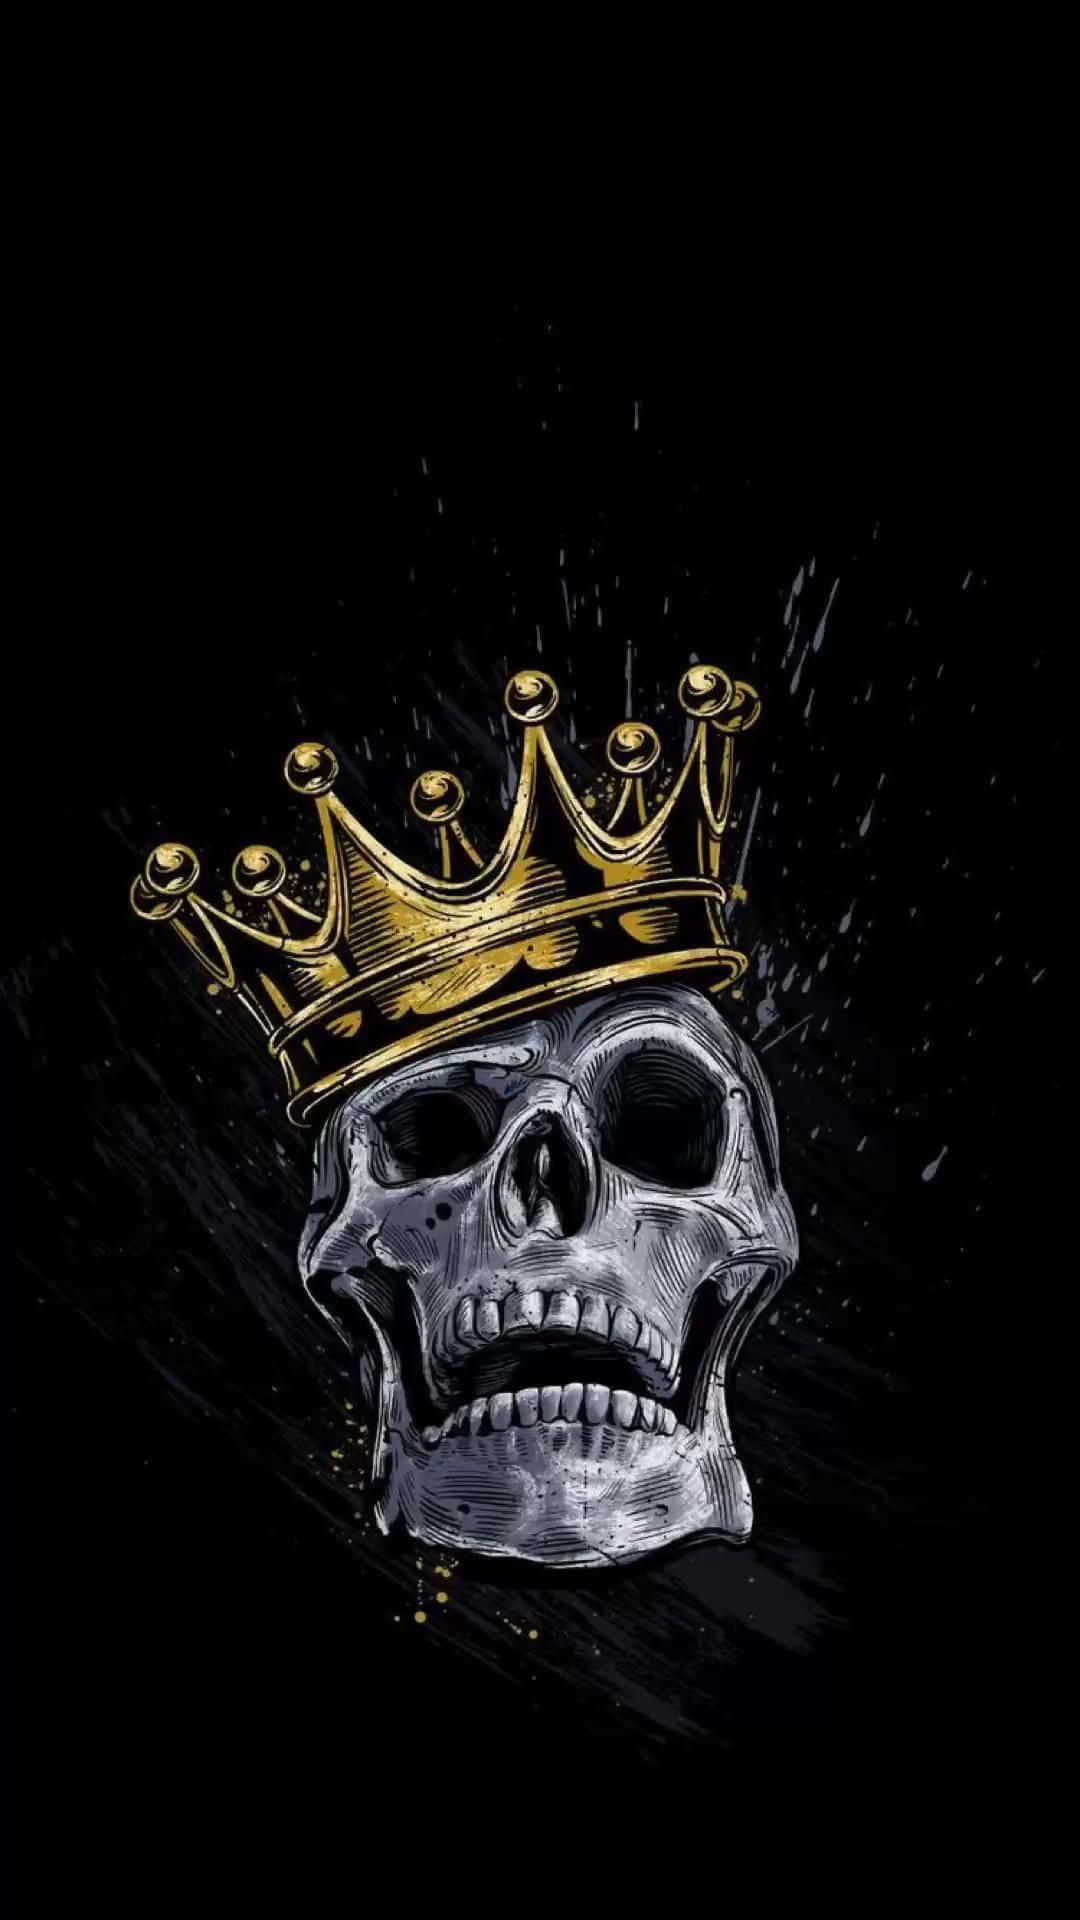 Skull And Crossbones With Crown Background